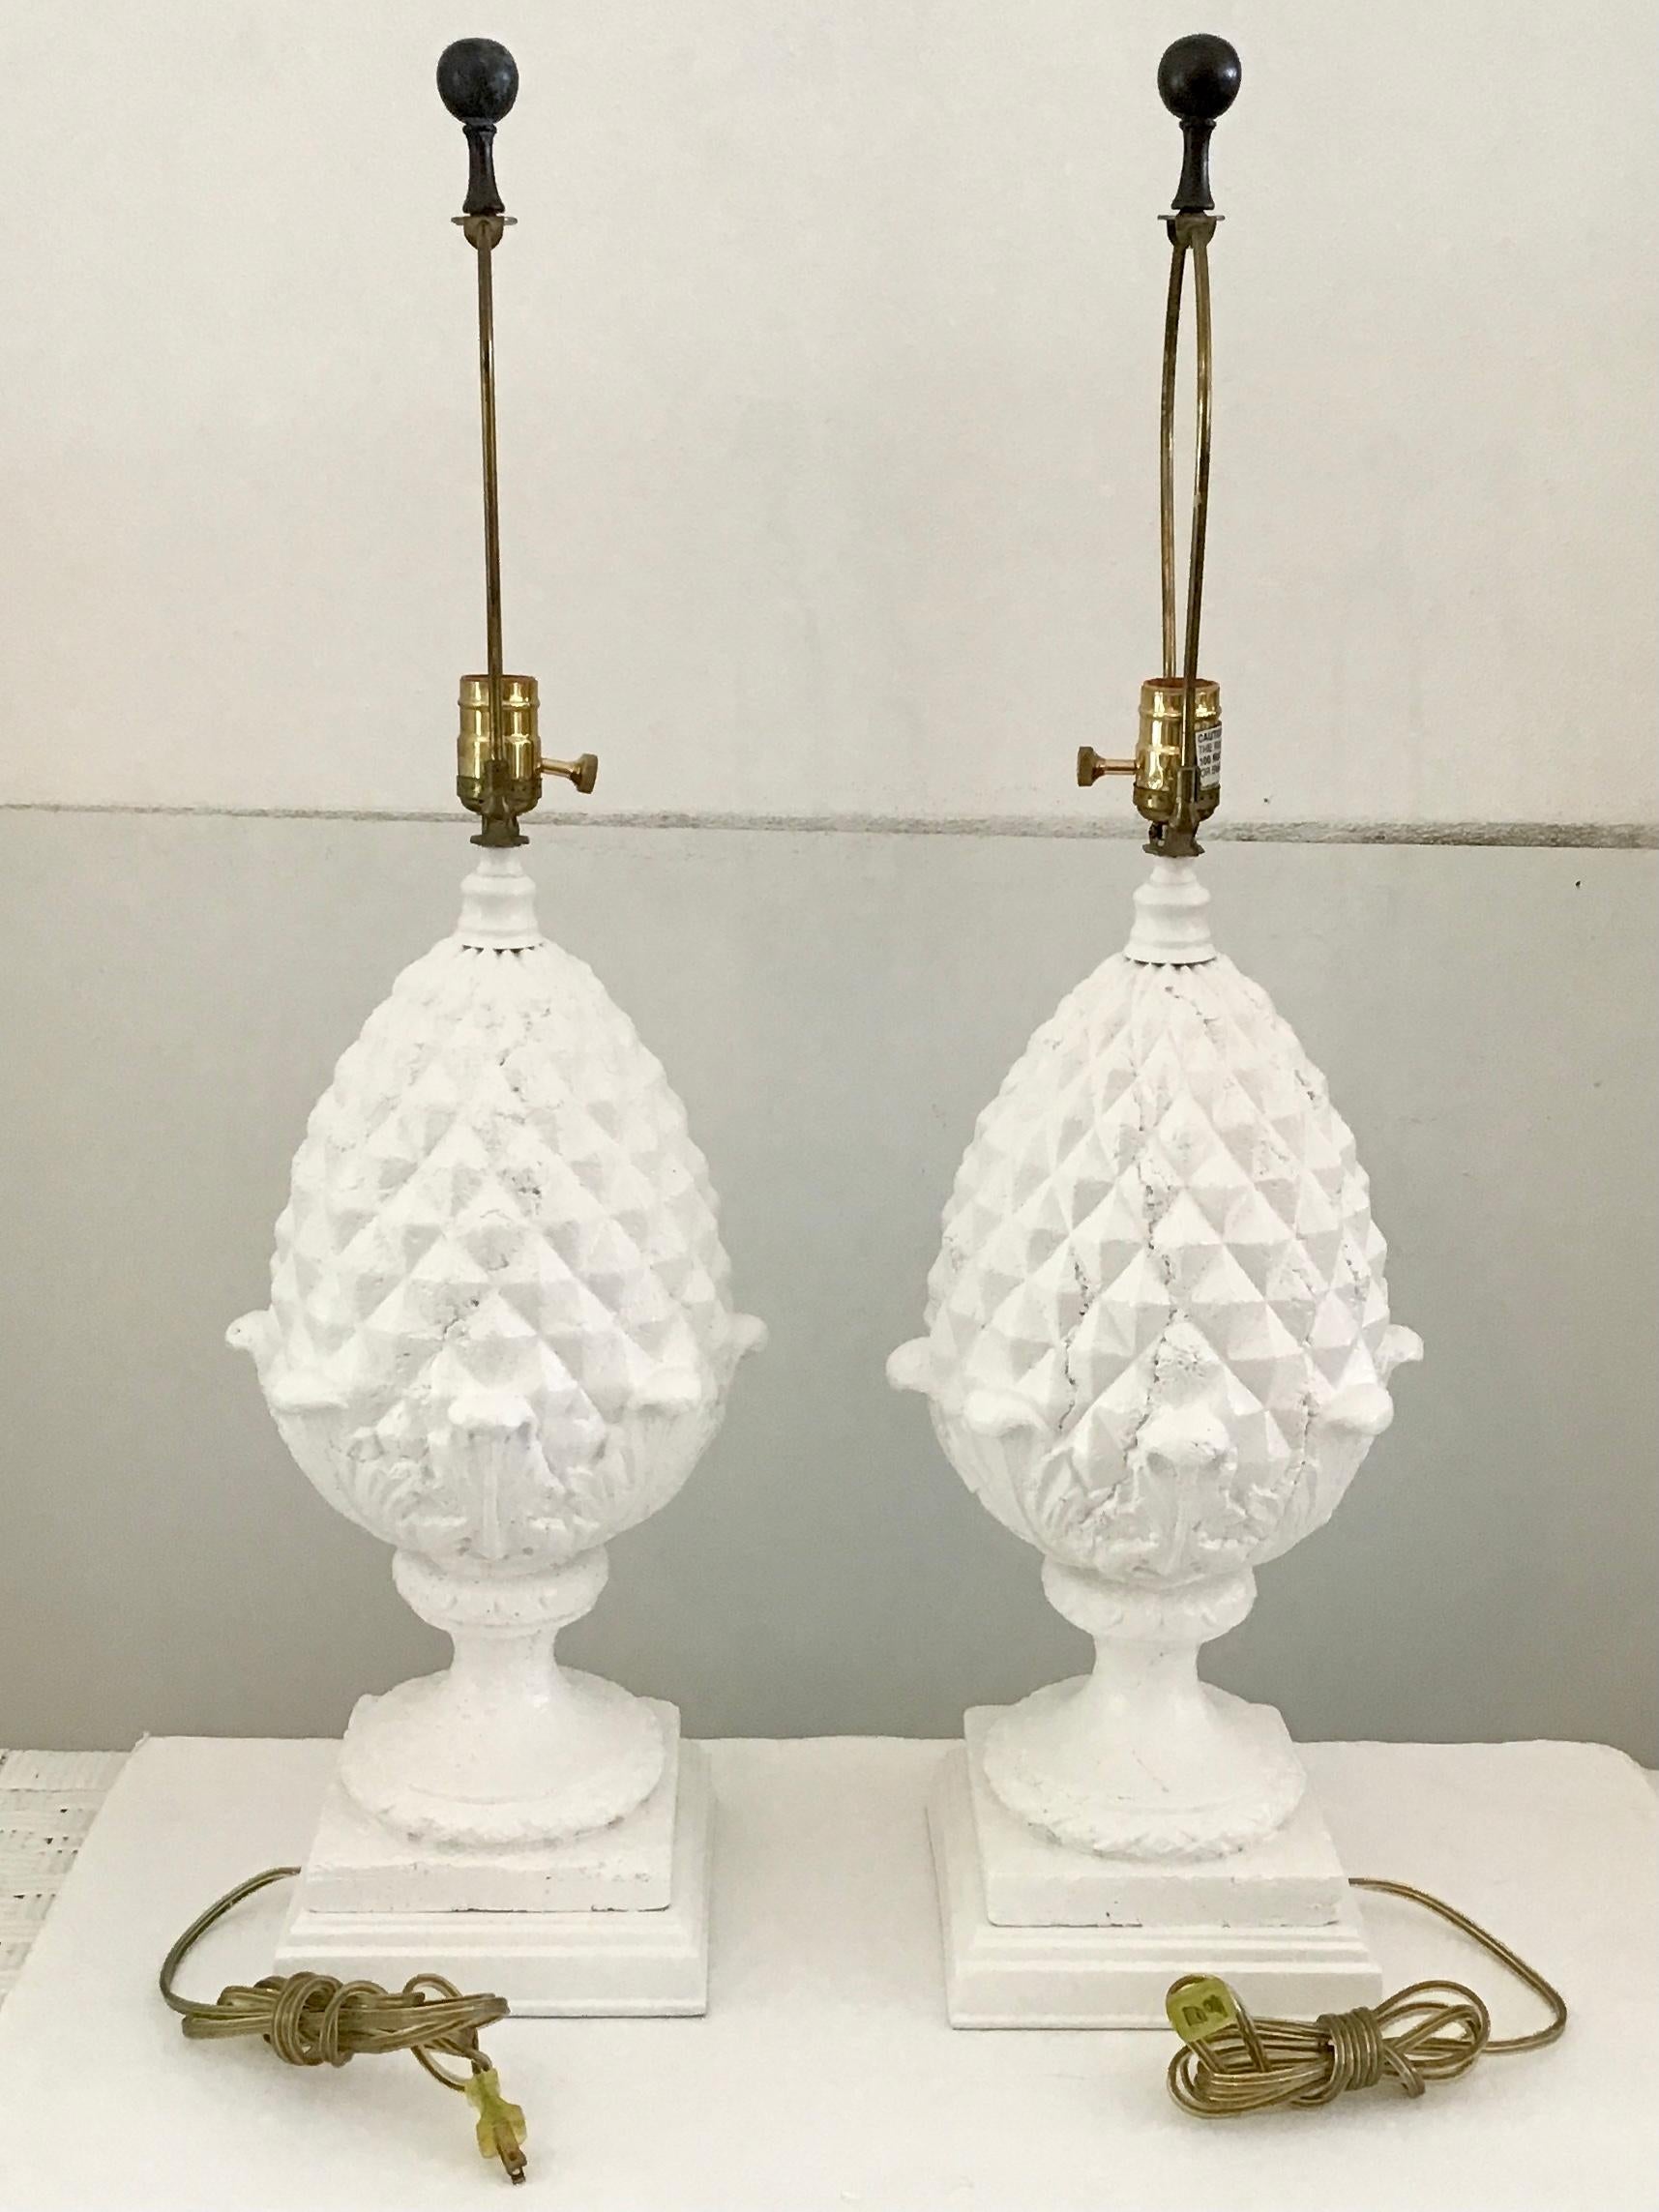 Stone Pineapple Table Lamps in Fresh White Finish, a Pair For Sale